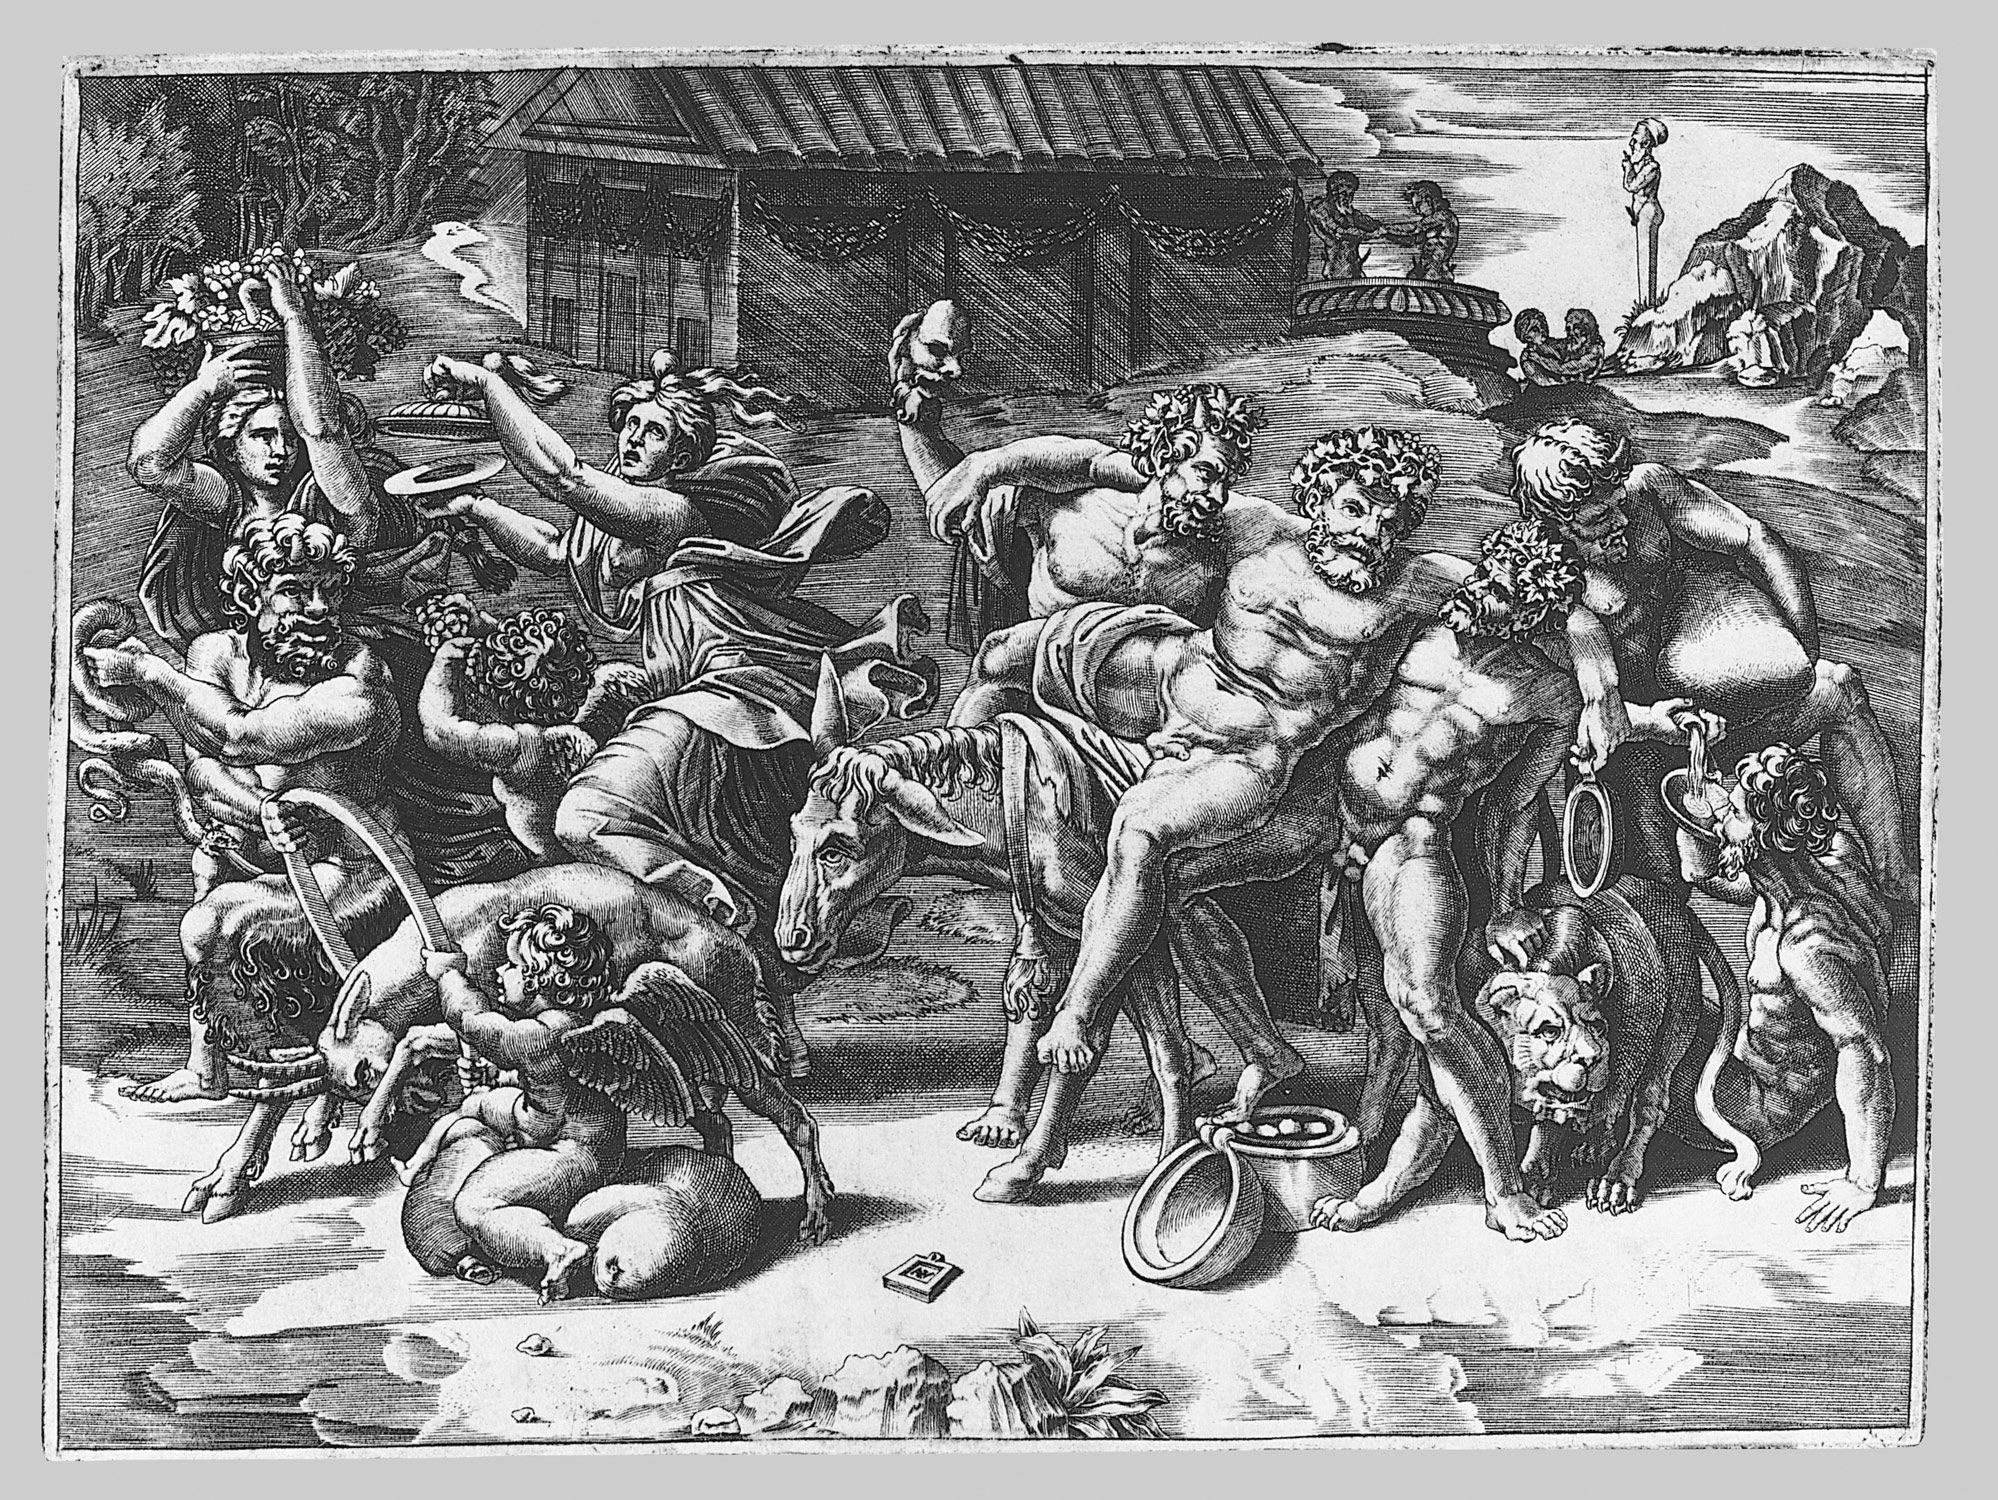 The procession of Silenus who is carried on an ass preceeded by a bacchant playing the cymbals and other figures